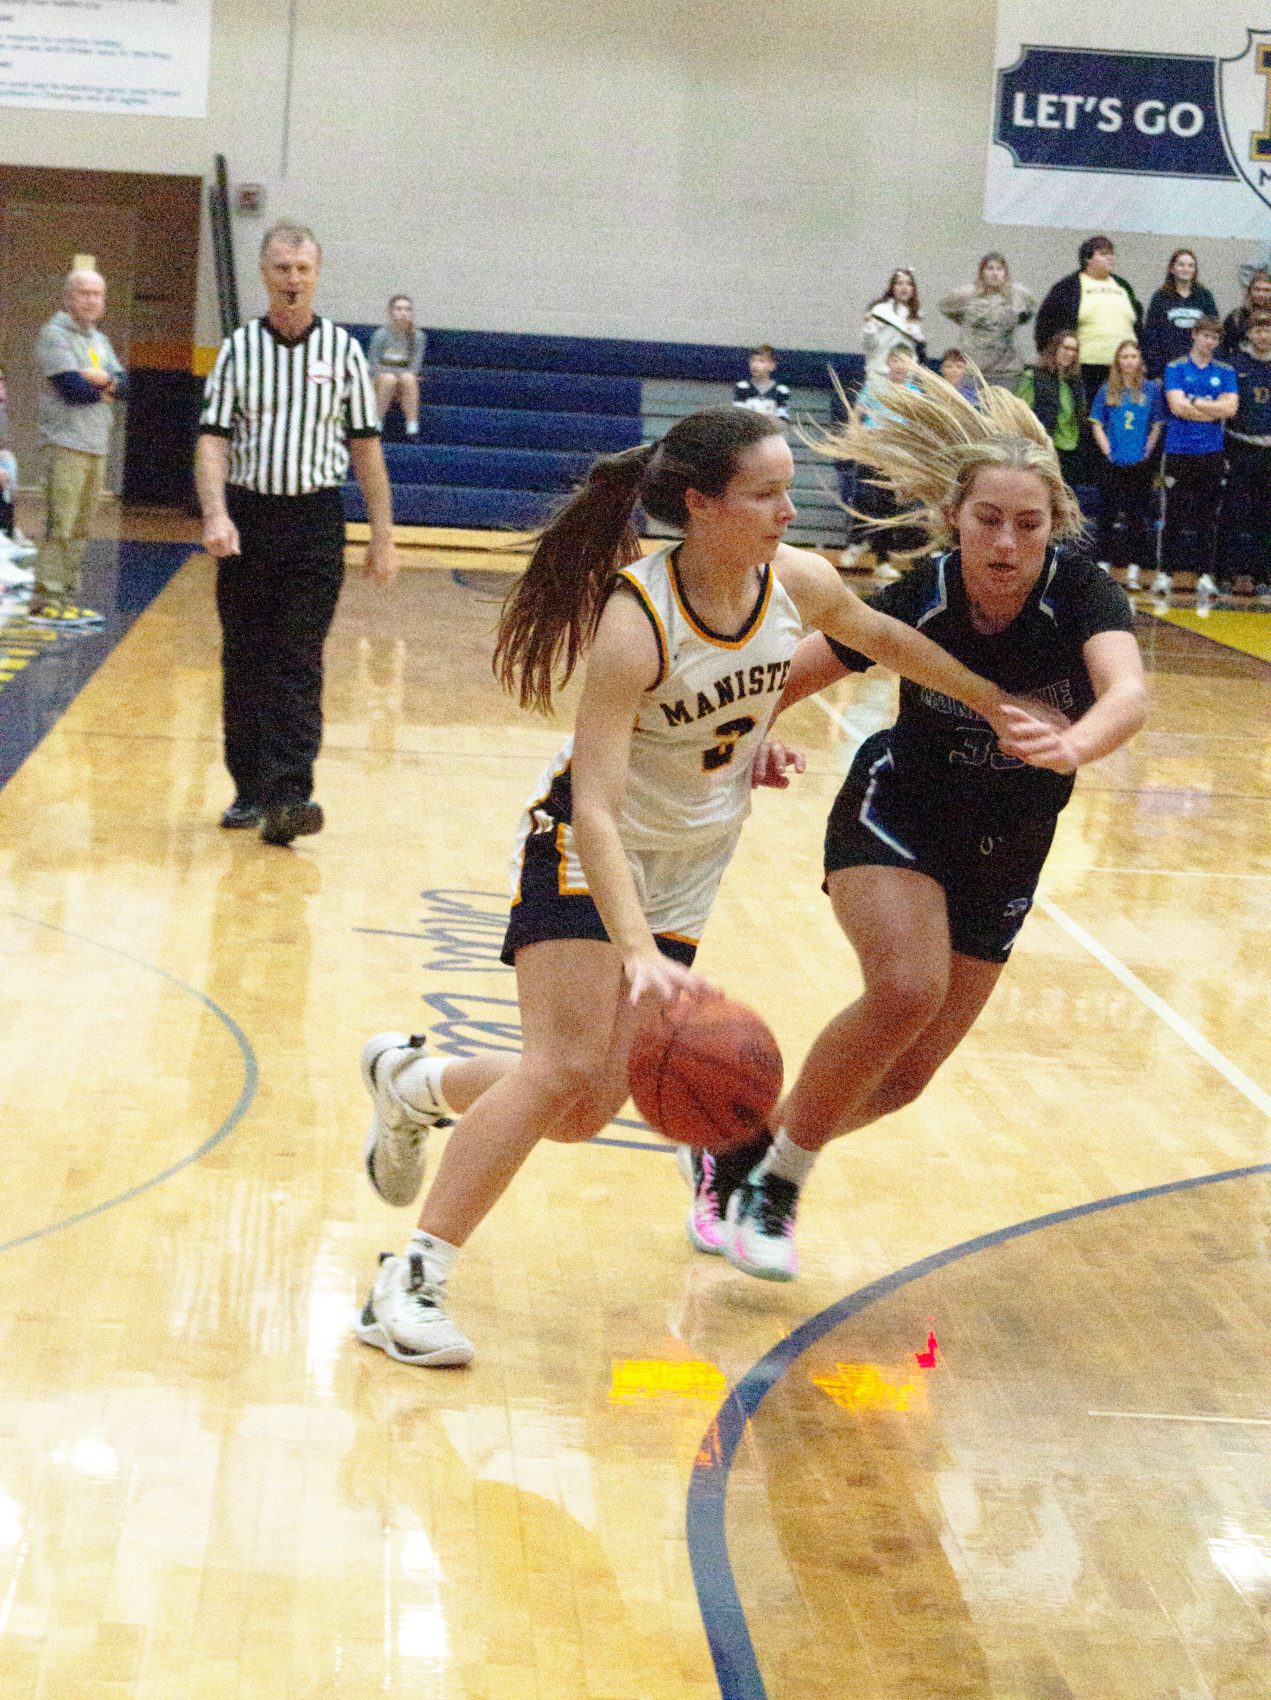 Montague girls return the favor by winning on Manistee’s home court